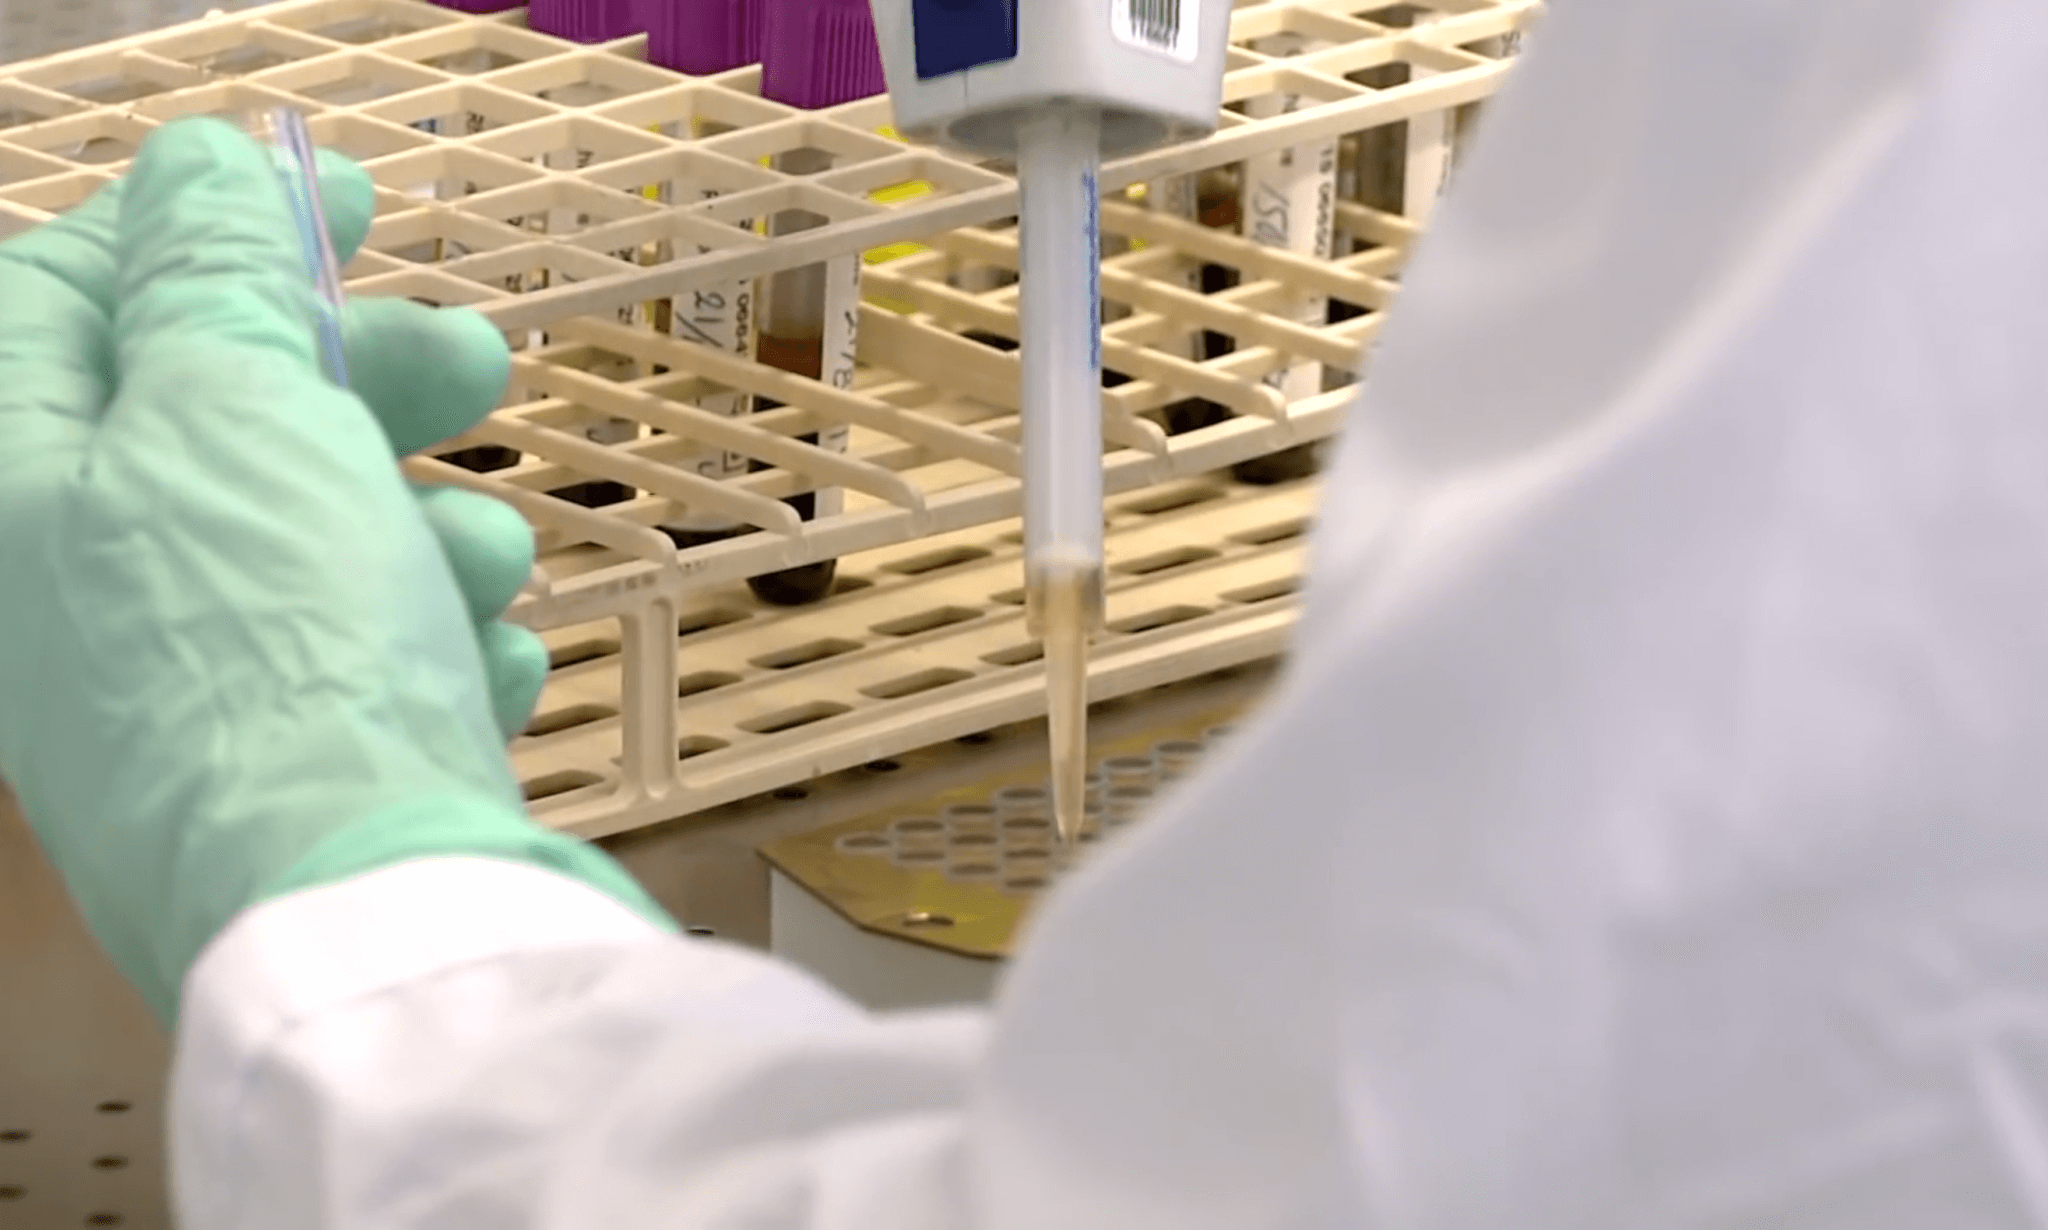 Research uses large pipette.